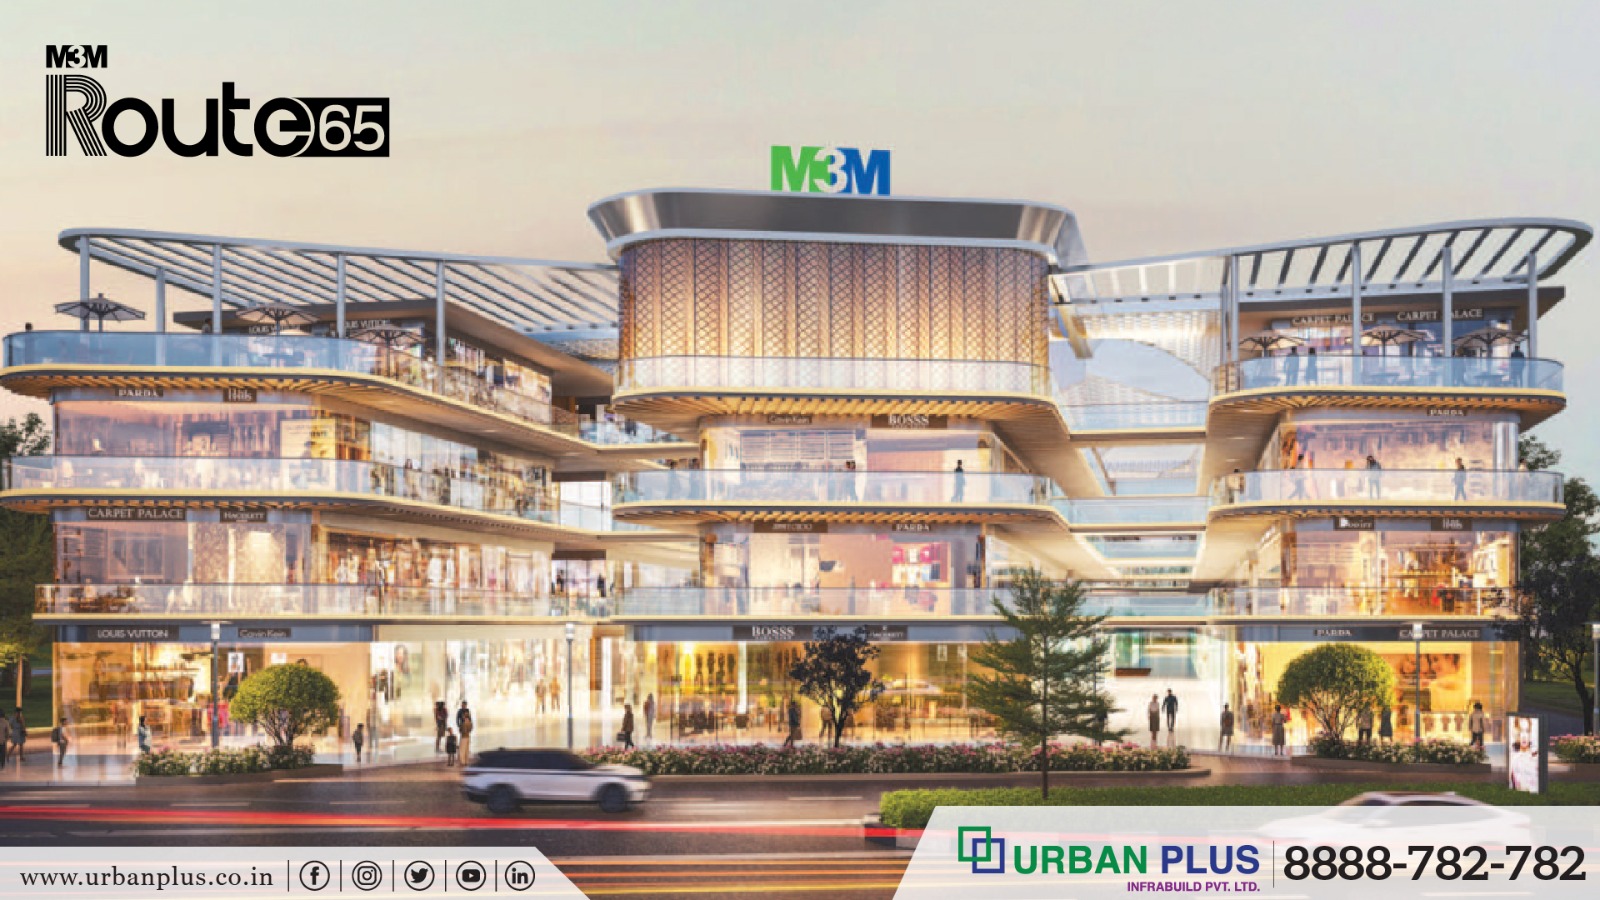  M3M ROUTE 65 - The Epitome of Fashion in Sector 65, Gurugram: